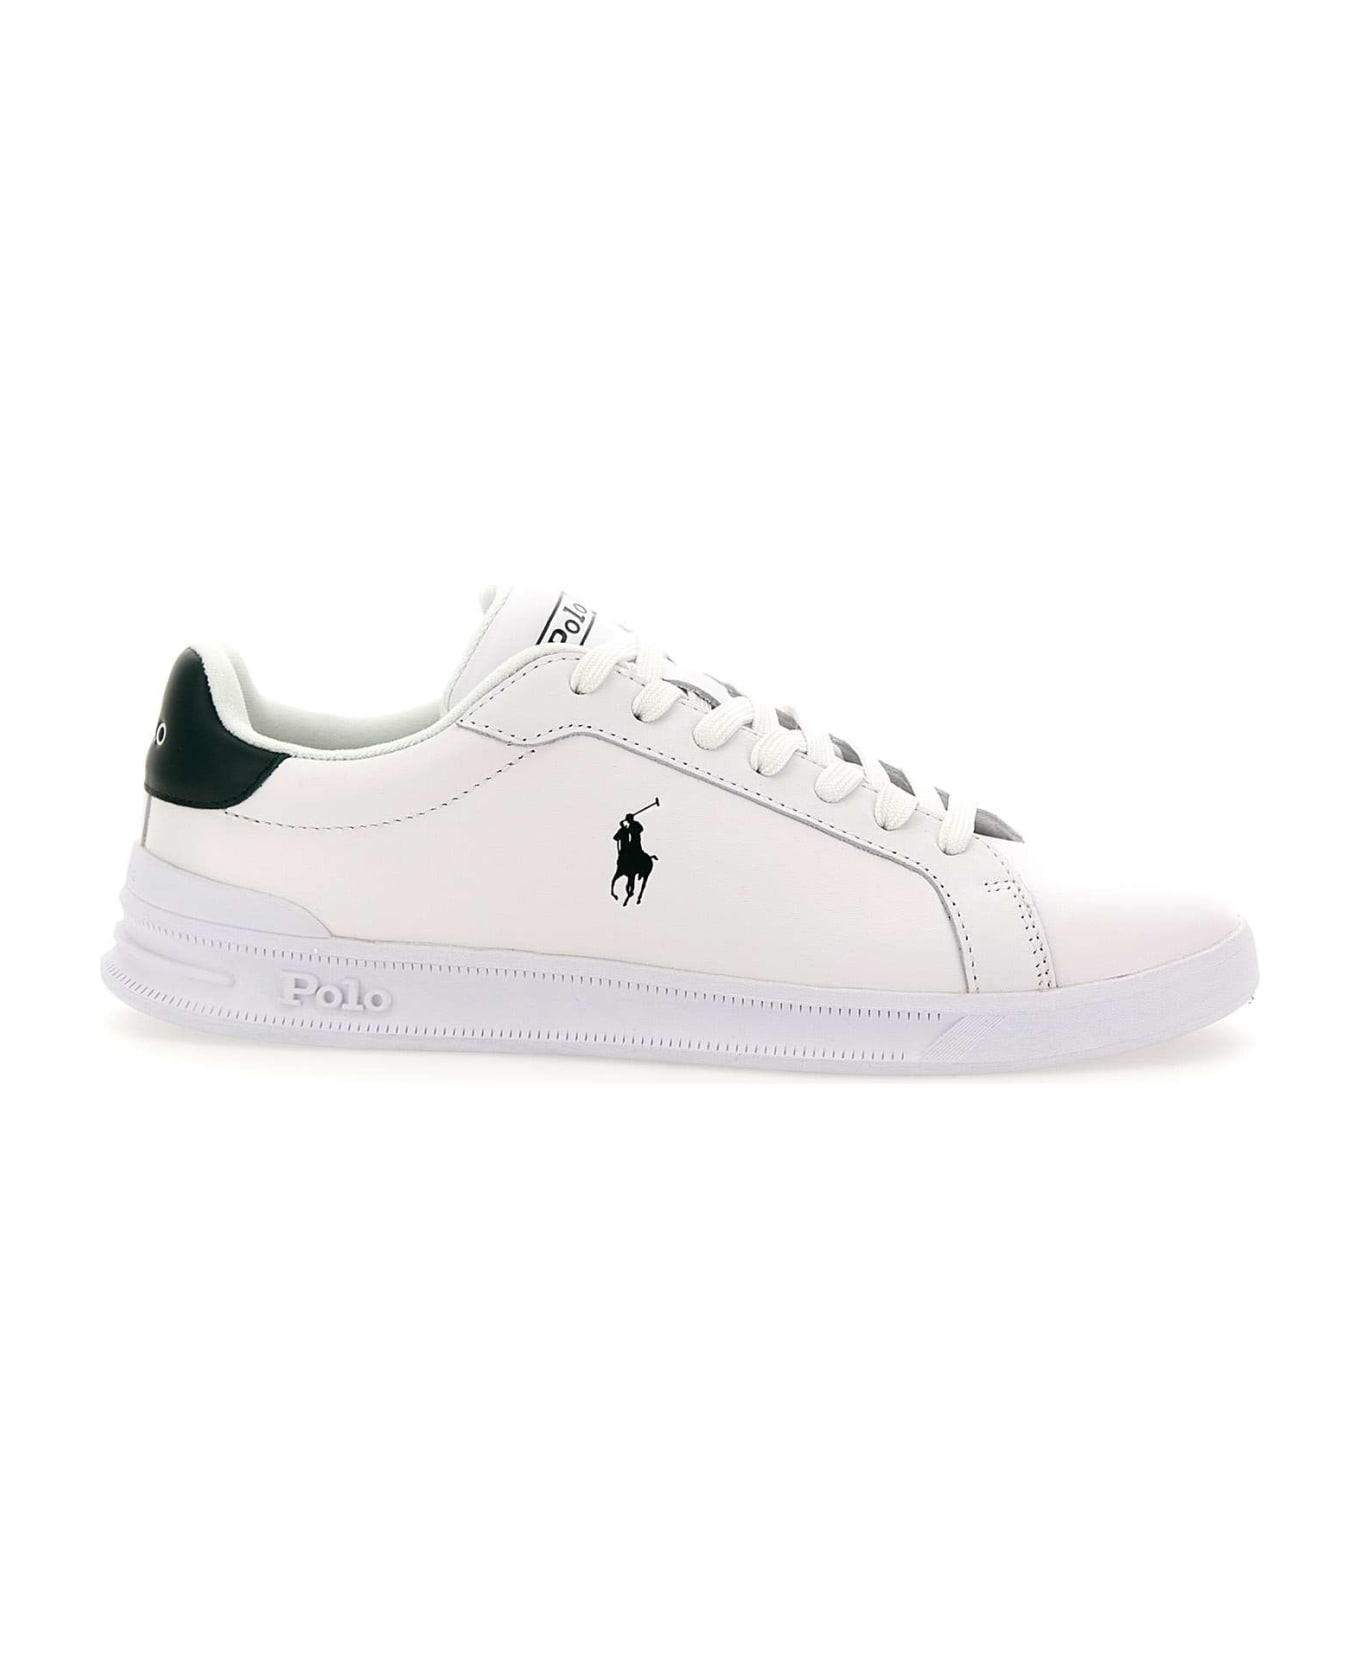 Polo Ralph Lauren 'heritage Court' Leather Sneakers - WHITE